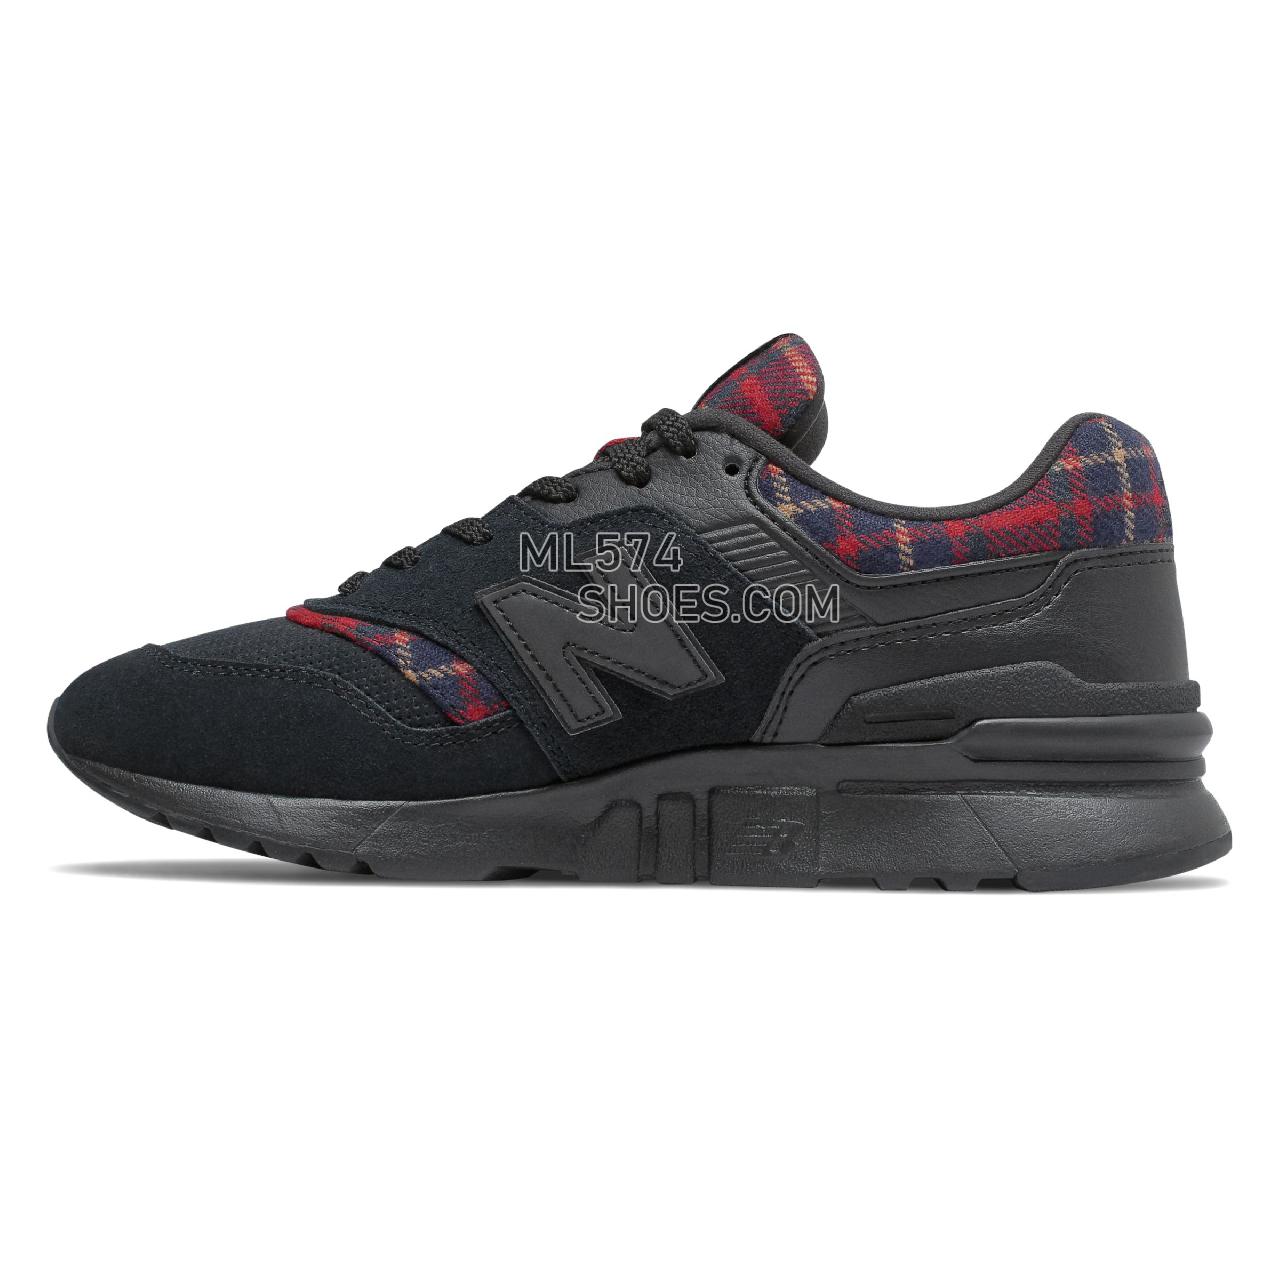 New Balance 997H - Women's Classic Sneakers - Black with Scarlet - CW997HXB